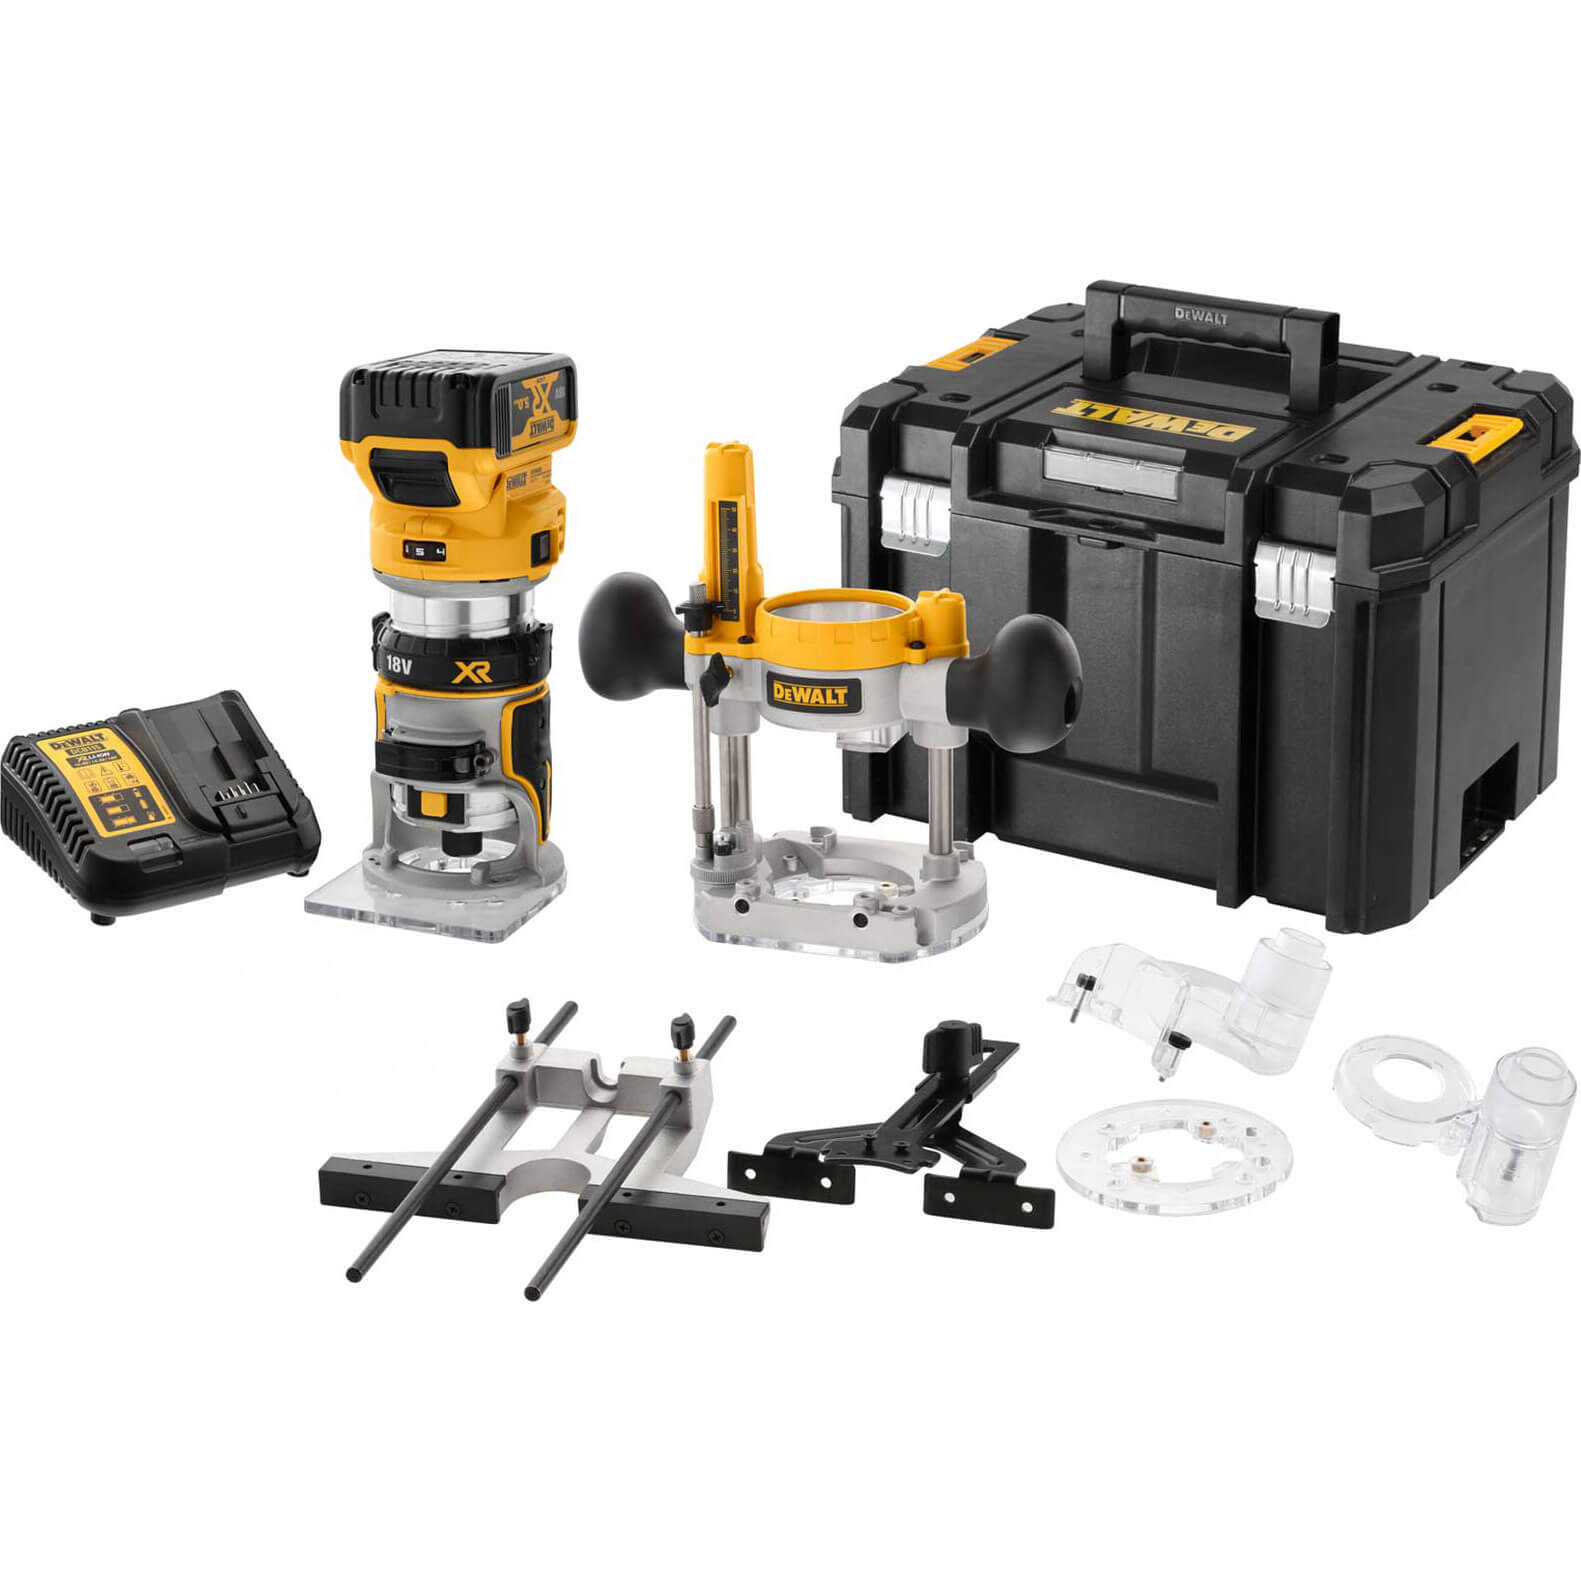 DeWalt DCW604NT 18v XR Cordless Brushless 1/4" Router Kit 1 x 5ah Li-ion Charger Case & Accessories